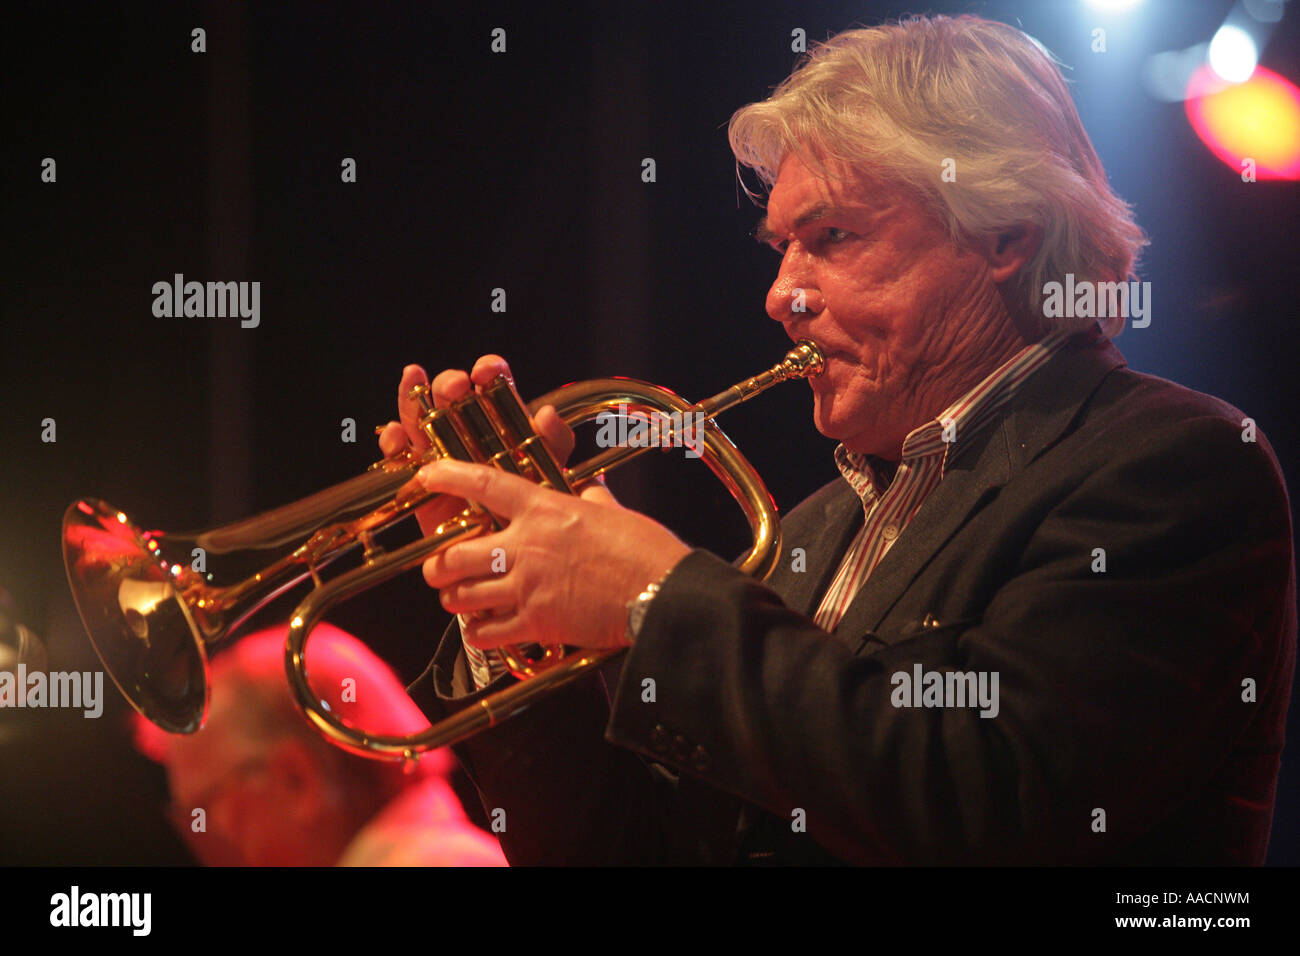 Manfred Schoof with his Jazztrumpet Stock Photo